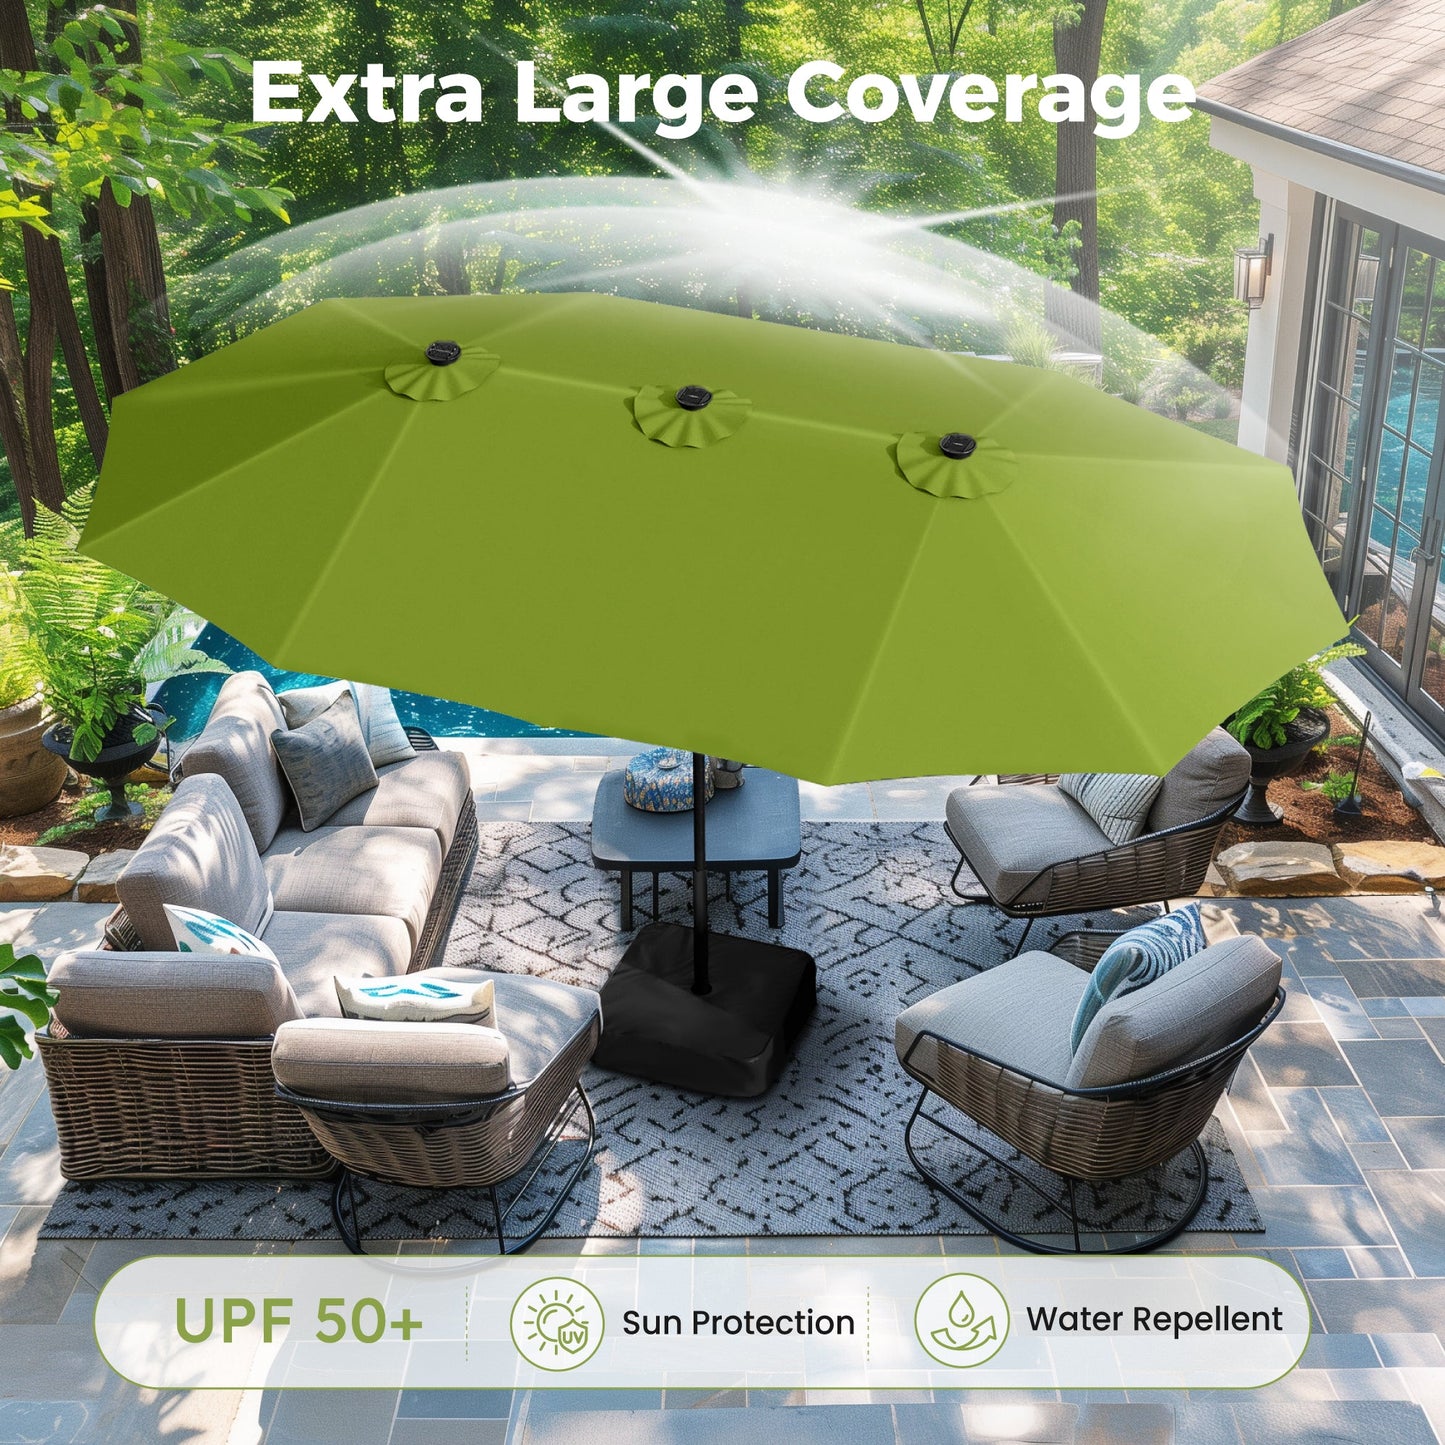 Alpha Joy 15ft Extra Large Outdoor Patio Double-Sided Umbrella with Solar Lights & Umbrella Base, Lime Green